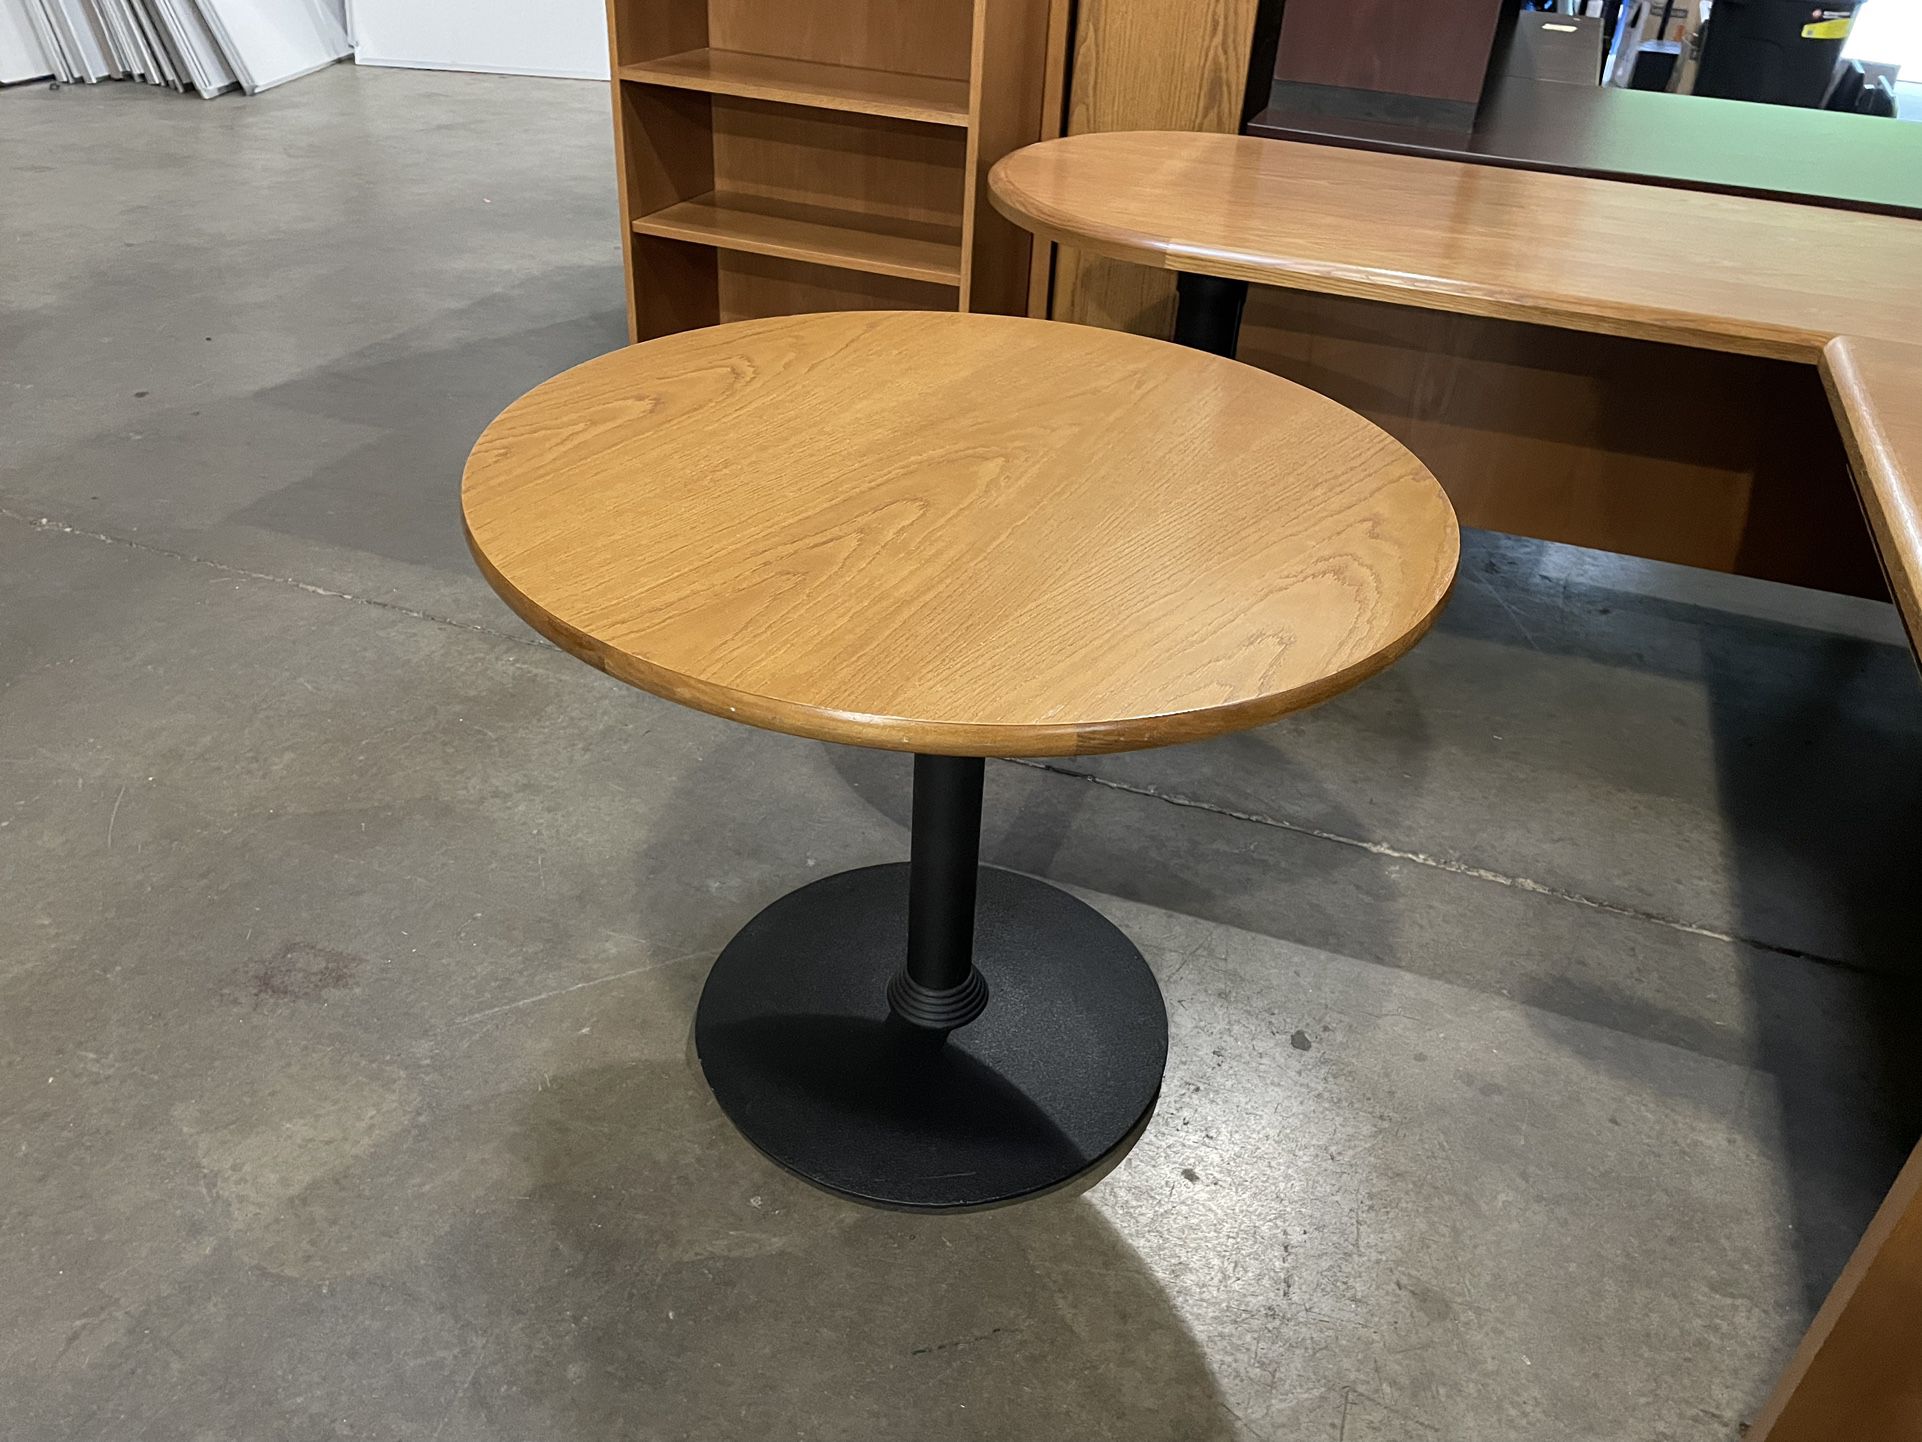 Oak Office Round Conference Table Or Dining Table! Only $25!!